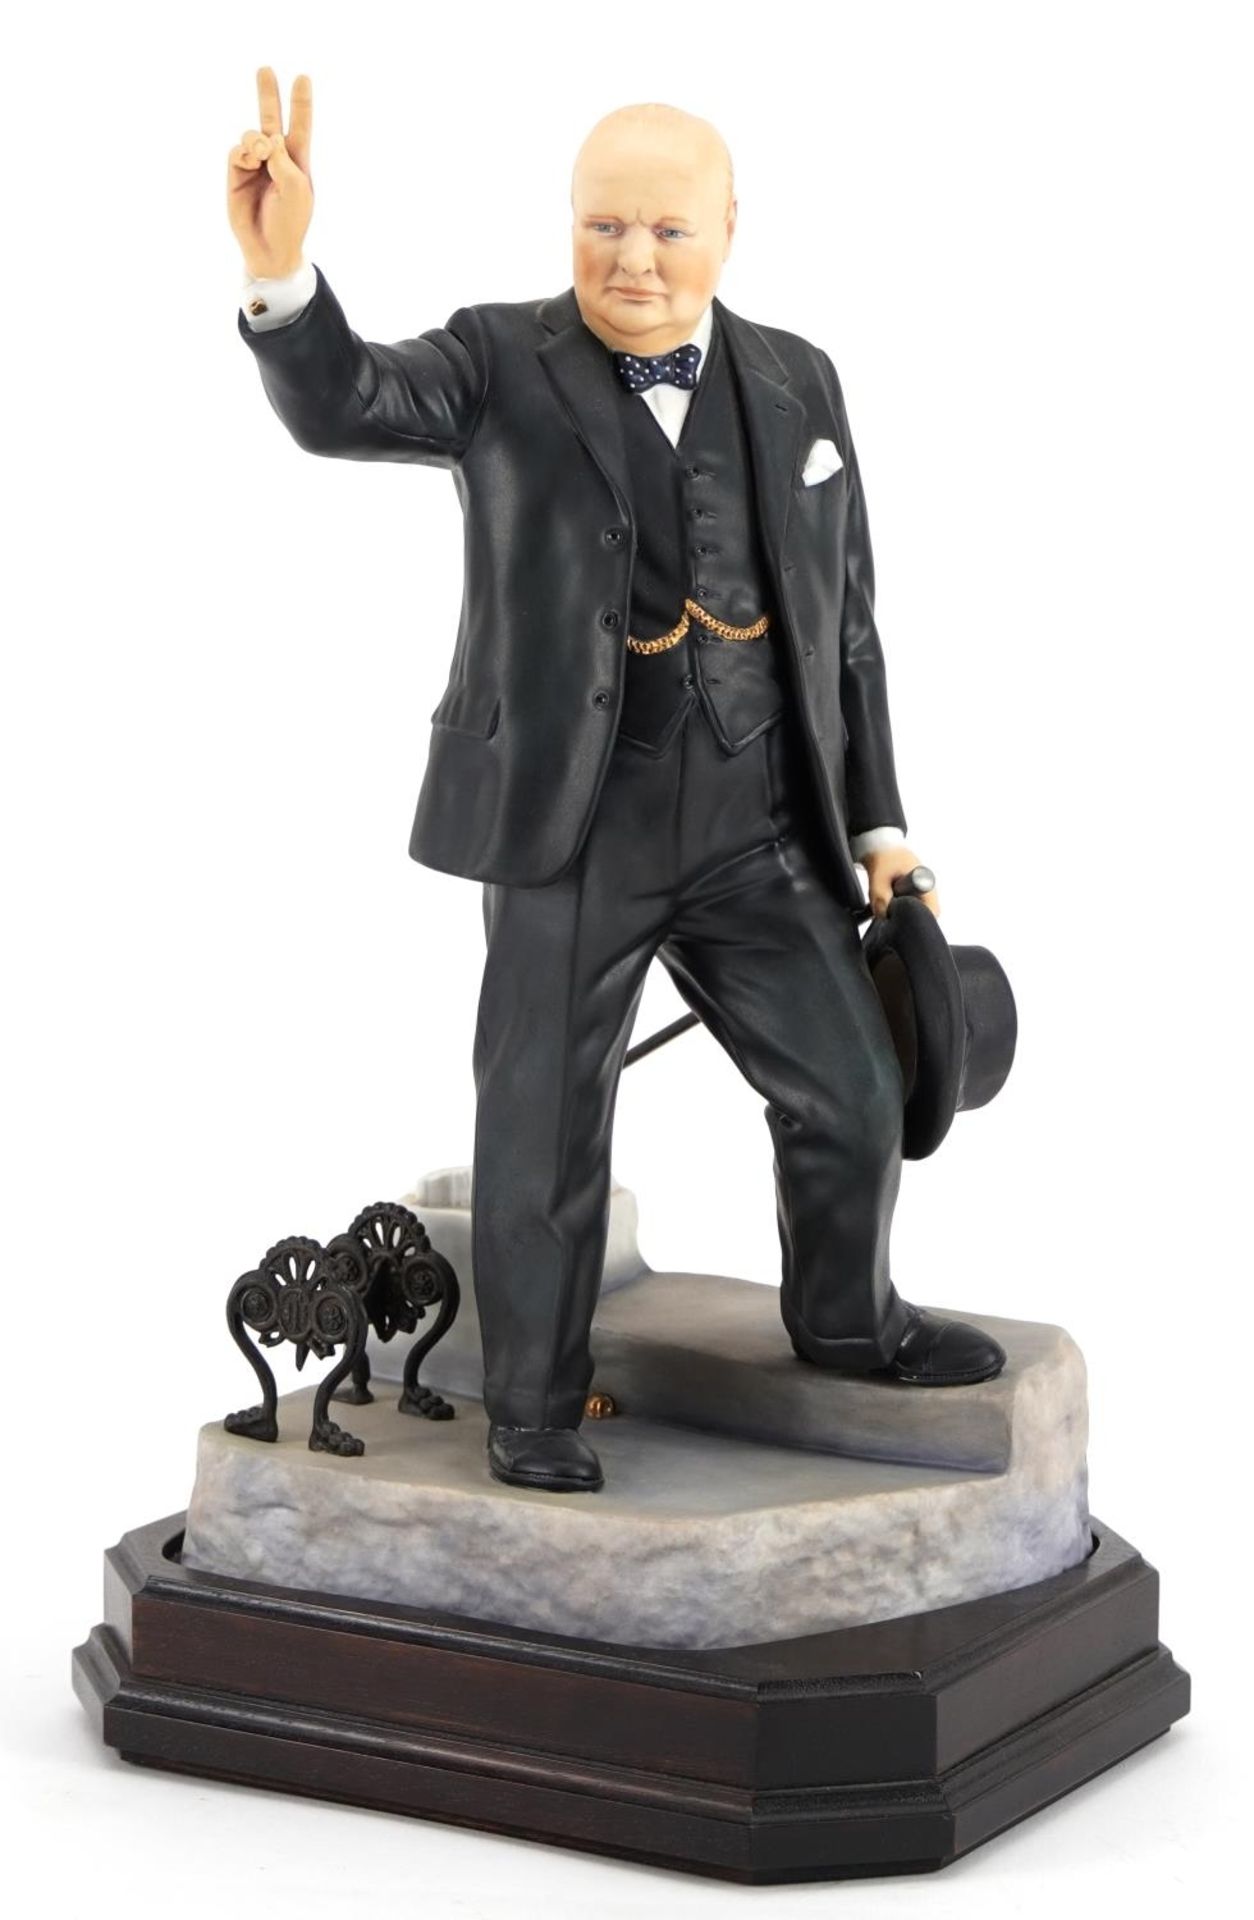 Ashmore for Worcester porcelain commemorative figure of Sir Winston Churchill raised on a wooden - Bild 2 aus 6